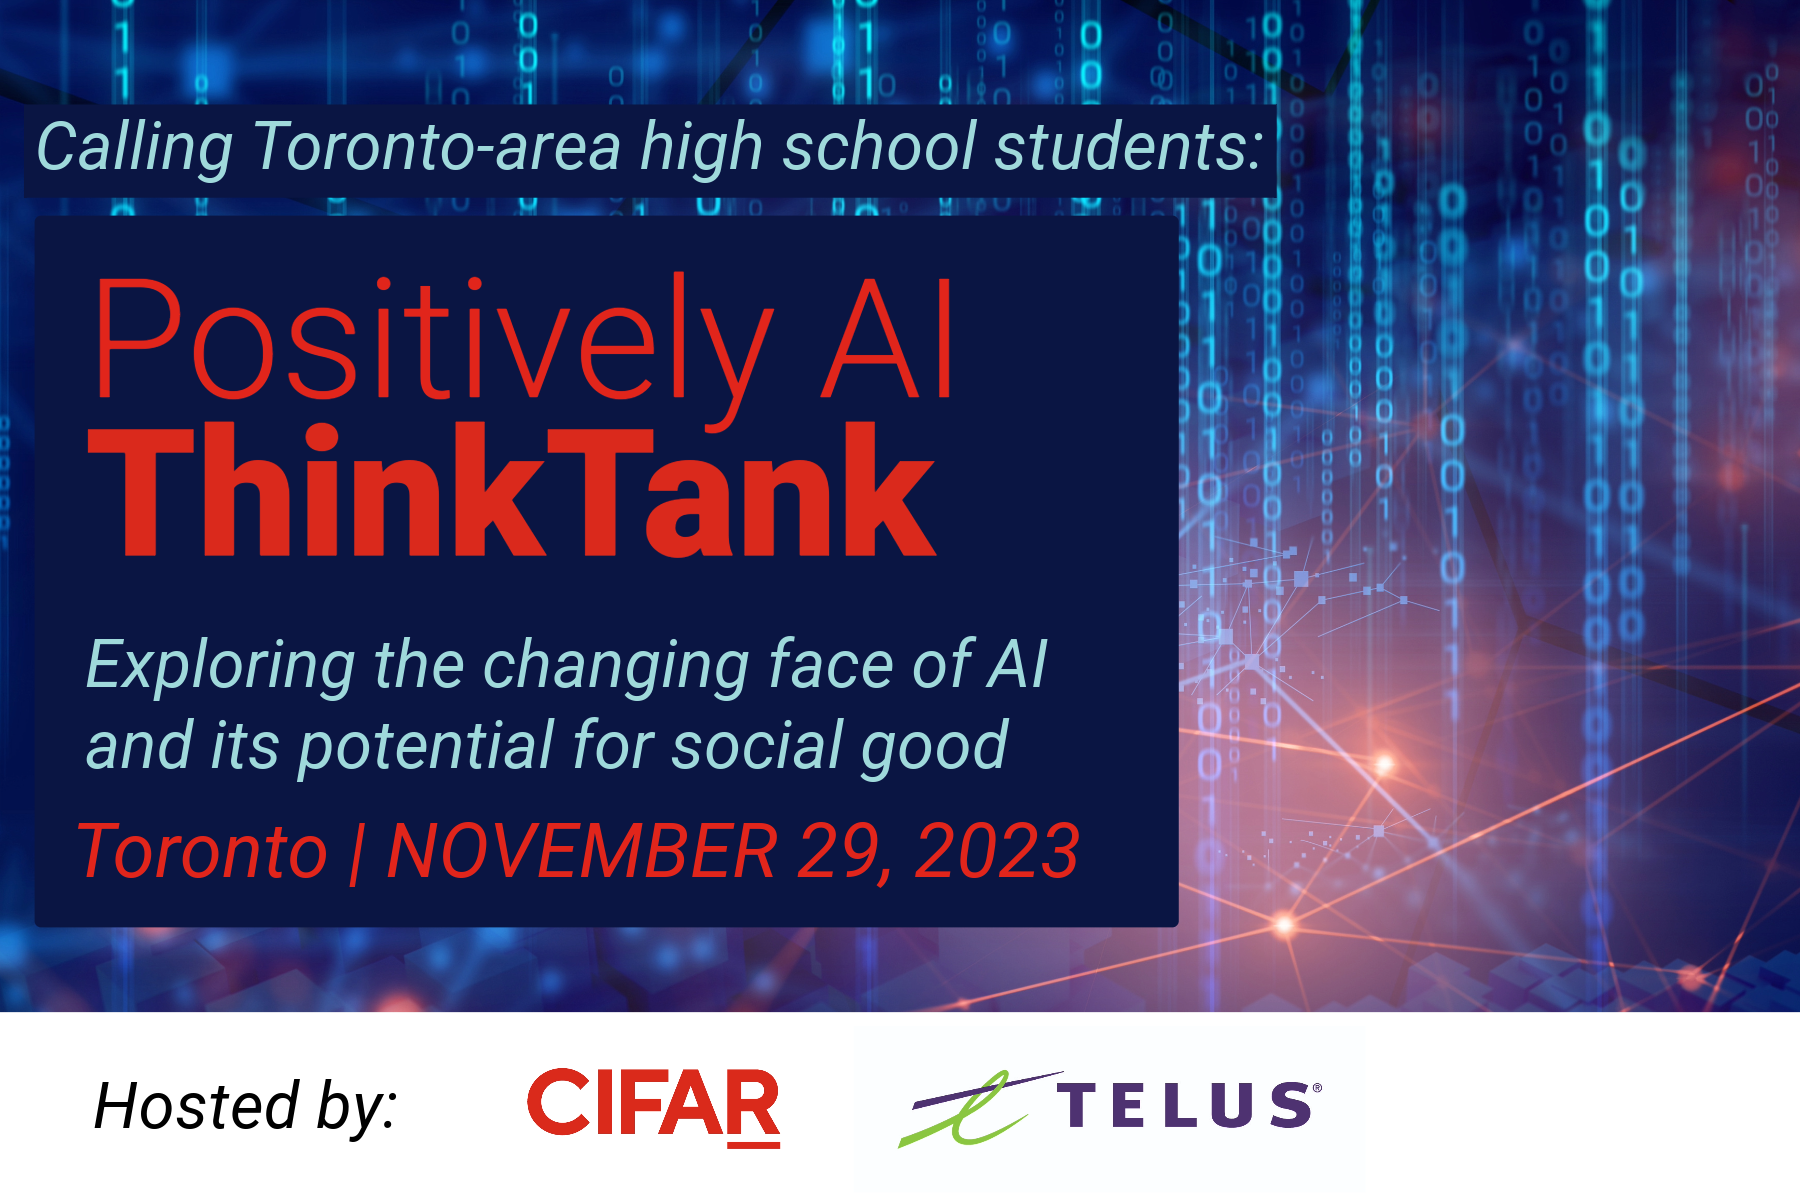 Calling Toronto-area high school students: Positively AI Think Tank Exploring the changing face of AI and its potential for social good Toronto / November 29, 2023 Hosted by CIFAR and TELUS 